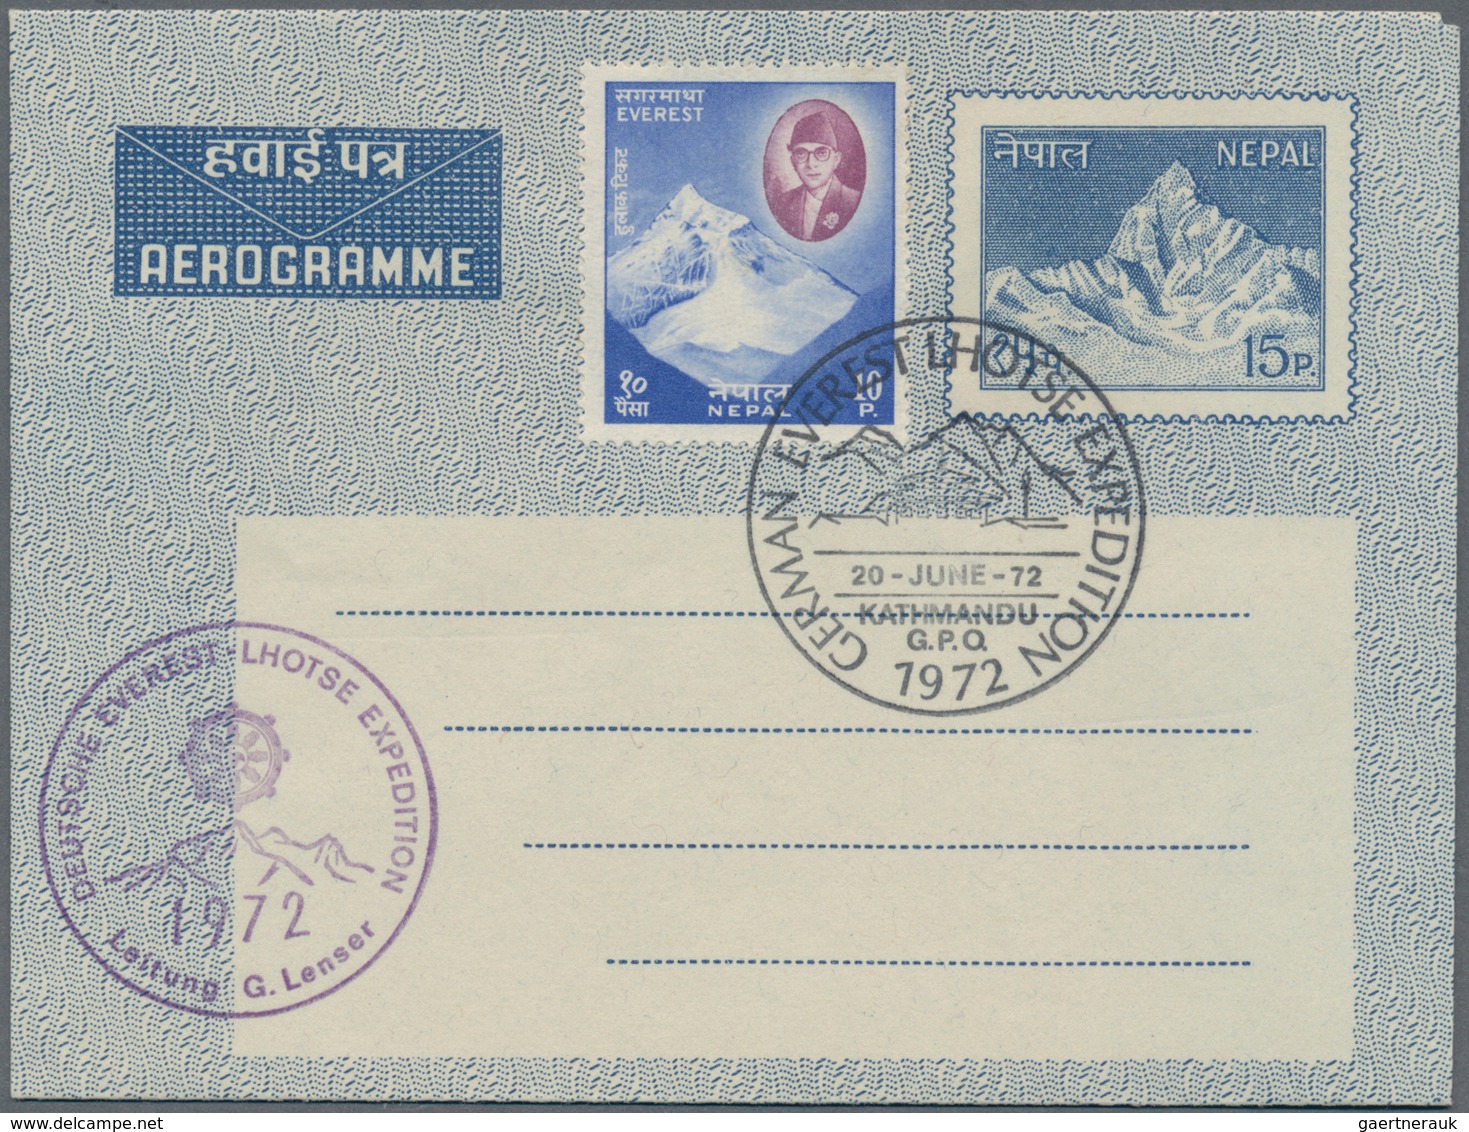 Nepal: 1959-1994 AEROGRAMMES: Collection Of About 50 Aerogrammes, Mostly Used Postally, Few Cancelle - Nepal